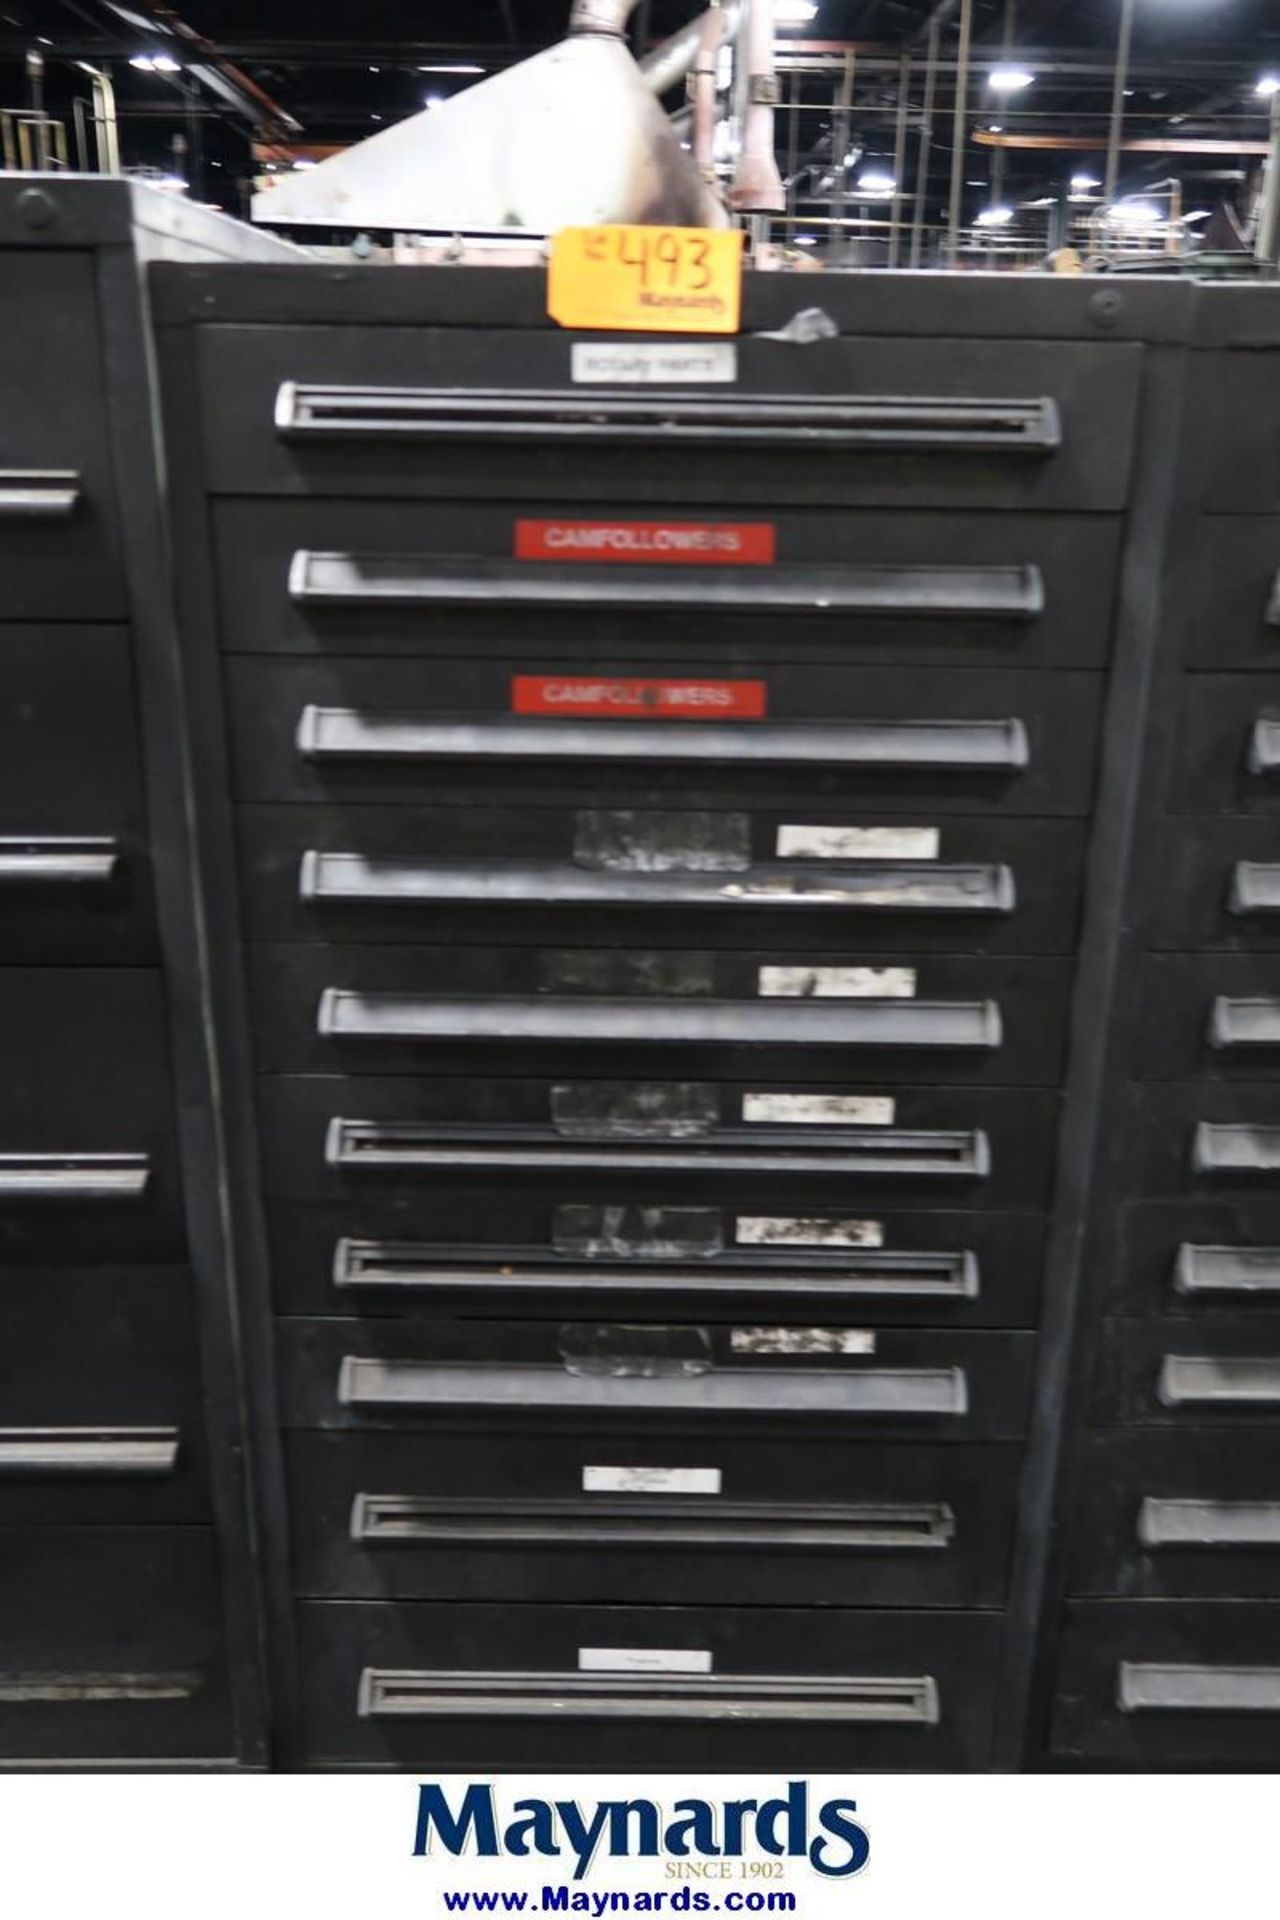 10-Drawer Heavy Duty Parts Cabinet